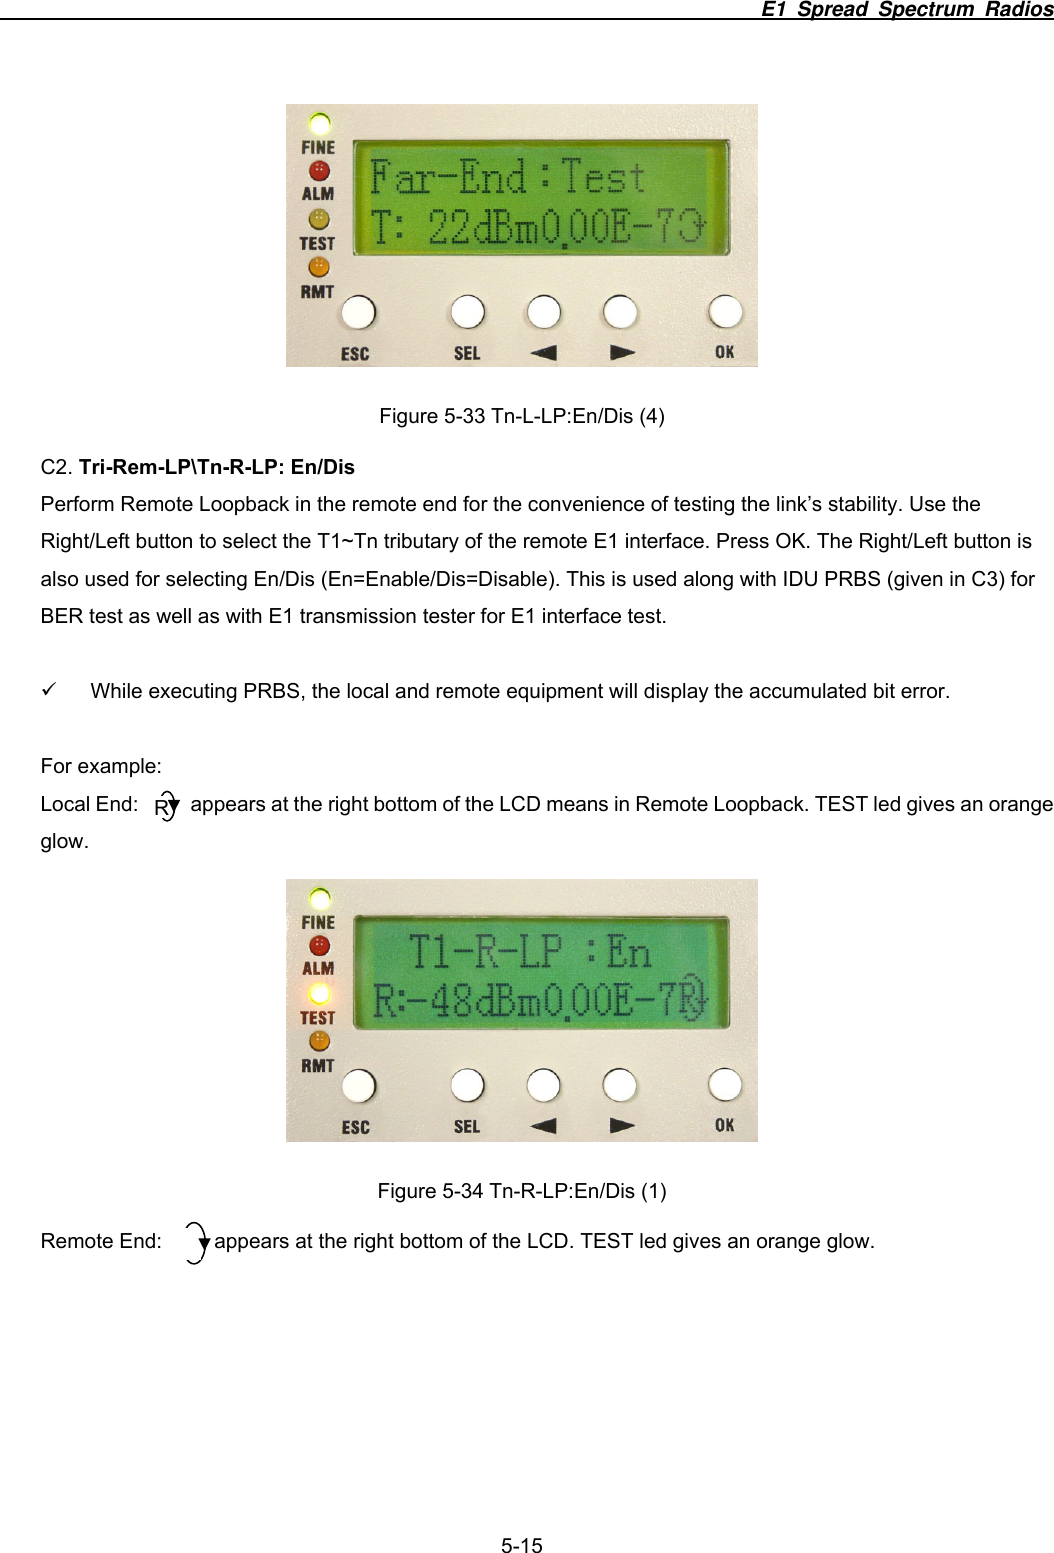                                                                          E1 Spread Spectrum Radios              5-15  Figure 5-33 Tn-L-LP:En/Dis (4) C2. Tri-Rem-LP\Tn-R-LP: En/Dis Perform Remote Loopback in the remote end for the convenience of testing the link’s stability. Use the Right/Left button to select the T1~Tn tributary of the remote E1 interface. Press OK. The Right/Left button is also used for selecting En/Dis (En=Enable/Dis=Disable). This is used along with IDU PRBS (given in C3) for BER test as well as with E1 transmission tester for E1 interface test.    9  While executing PRBS, the local and remote equipment will display the accumulated bit error.  For example: Local End:     appears at the right bottom of the LCD means in Remote Loopback. TEST led gives an orange glow.  Figure 5-34 Tn-R-LP:En/Dis (1) Remote End:          appears at the right bottom of the LCD. TEST led gives an orange glow. R 